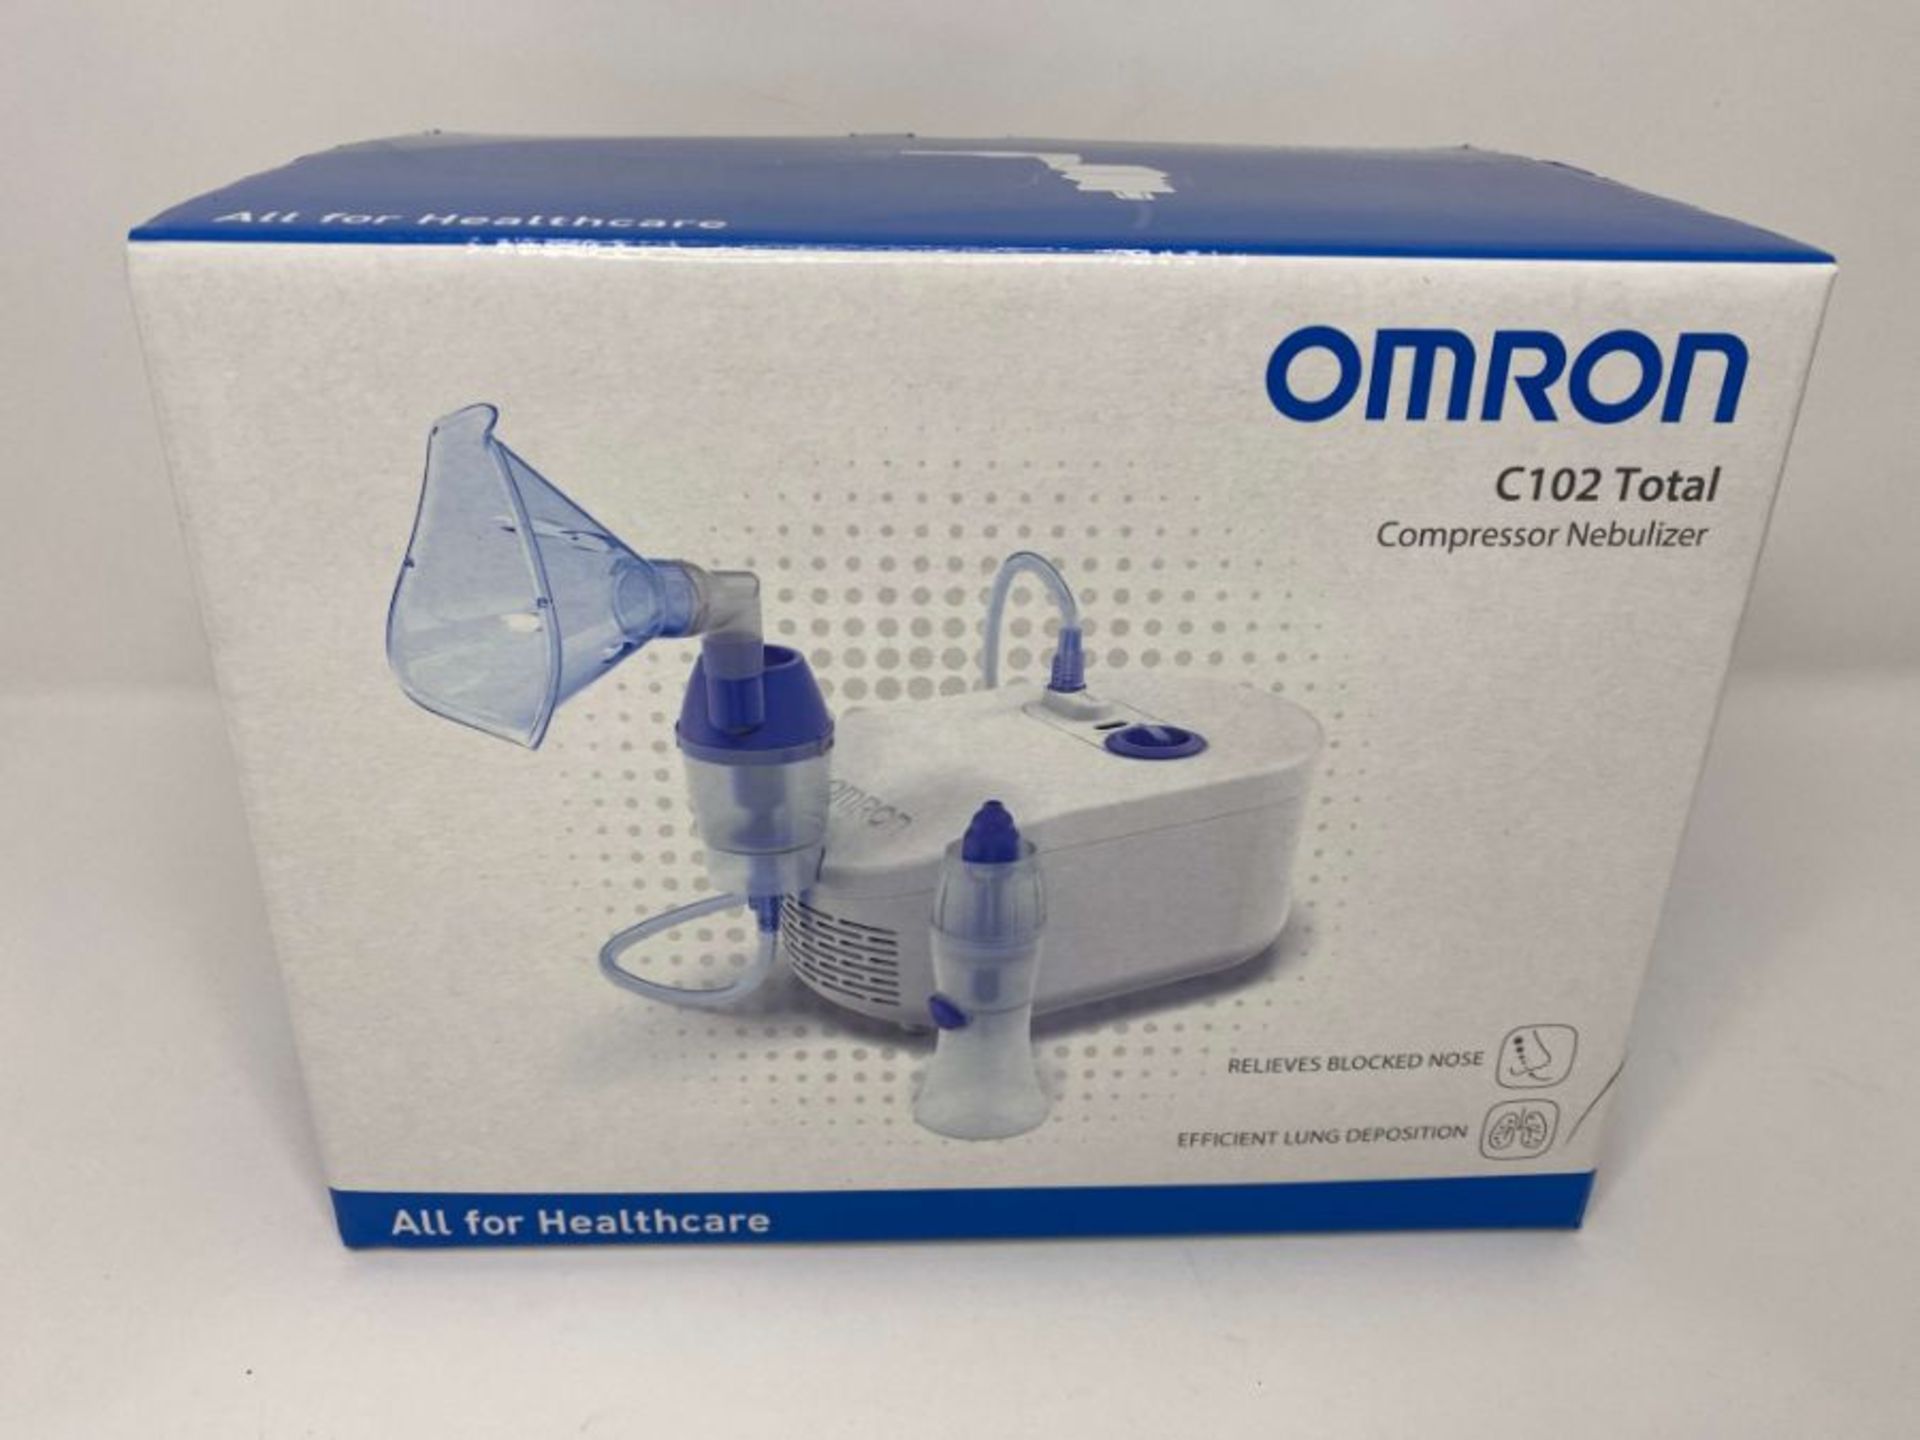 OMRON C102 Total 2-in-1 Nebuliser with Nasal Shower - Image 2 of 2